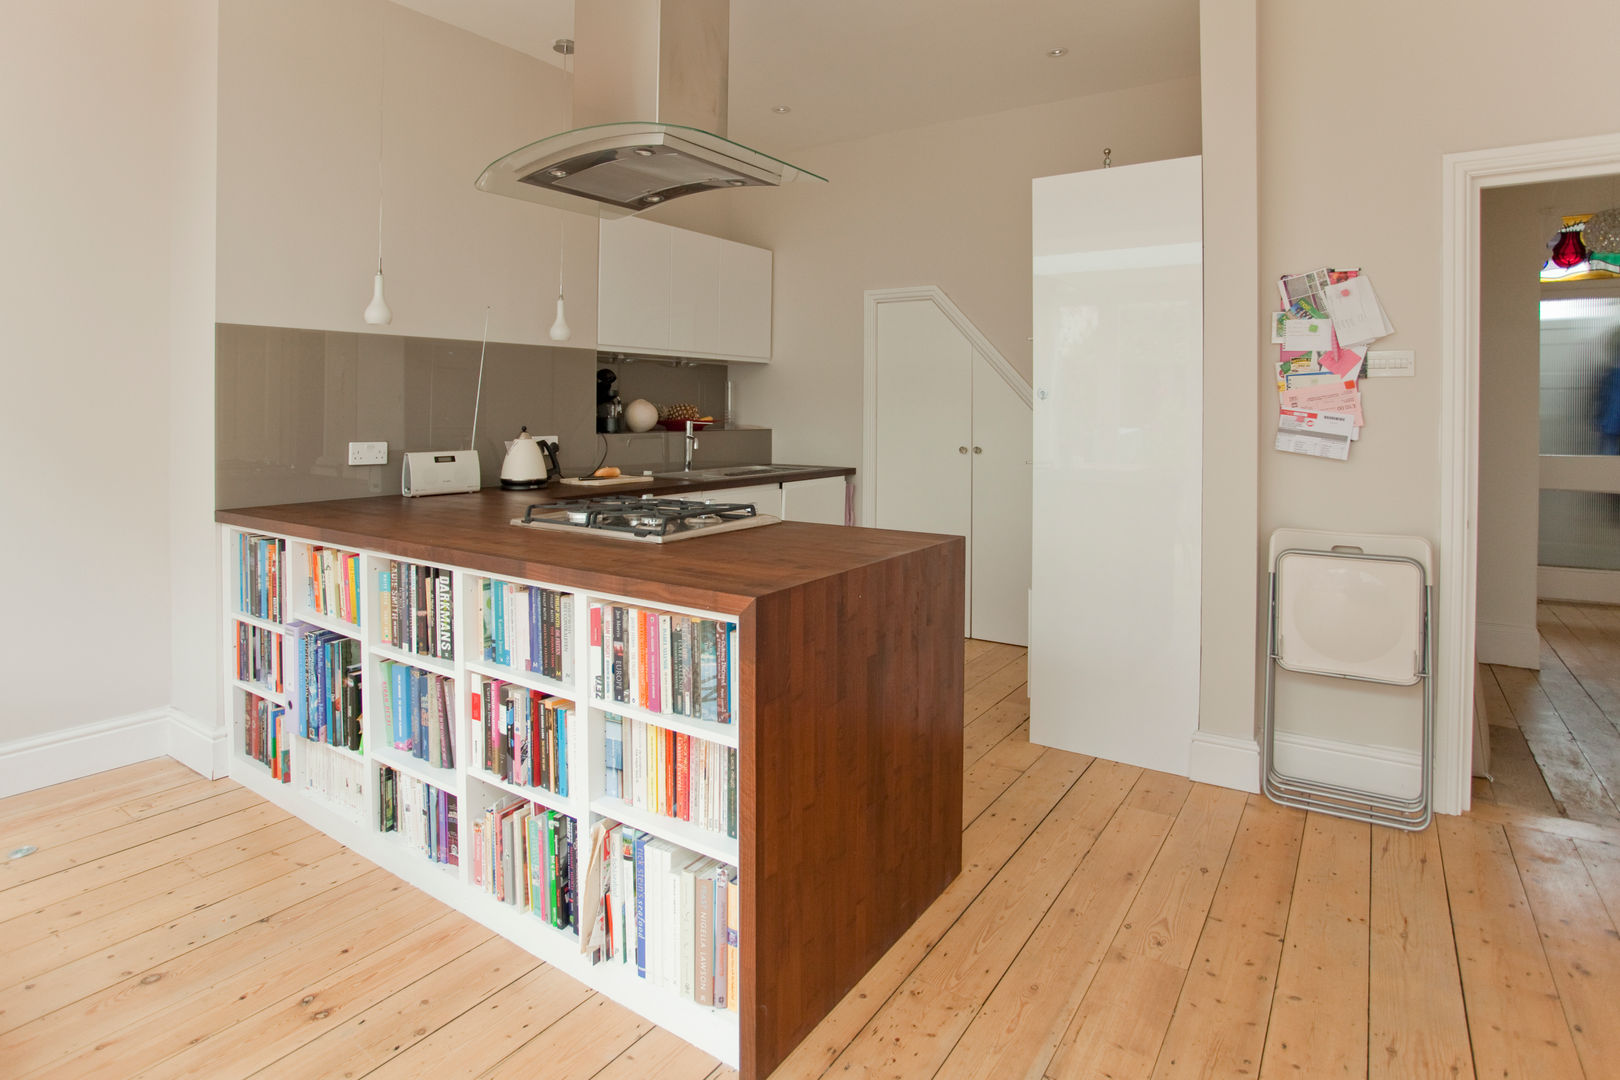 Rear extension and remodelling in Central Bristol Dittrich Hudson Vasetti Architects Kitchen